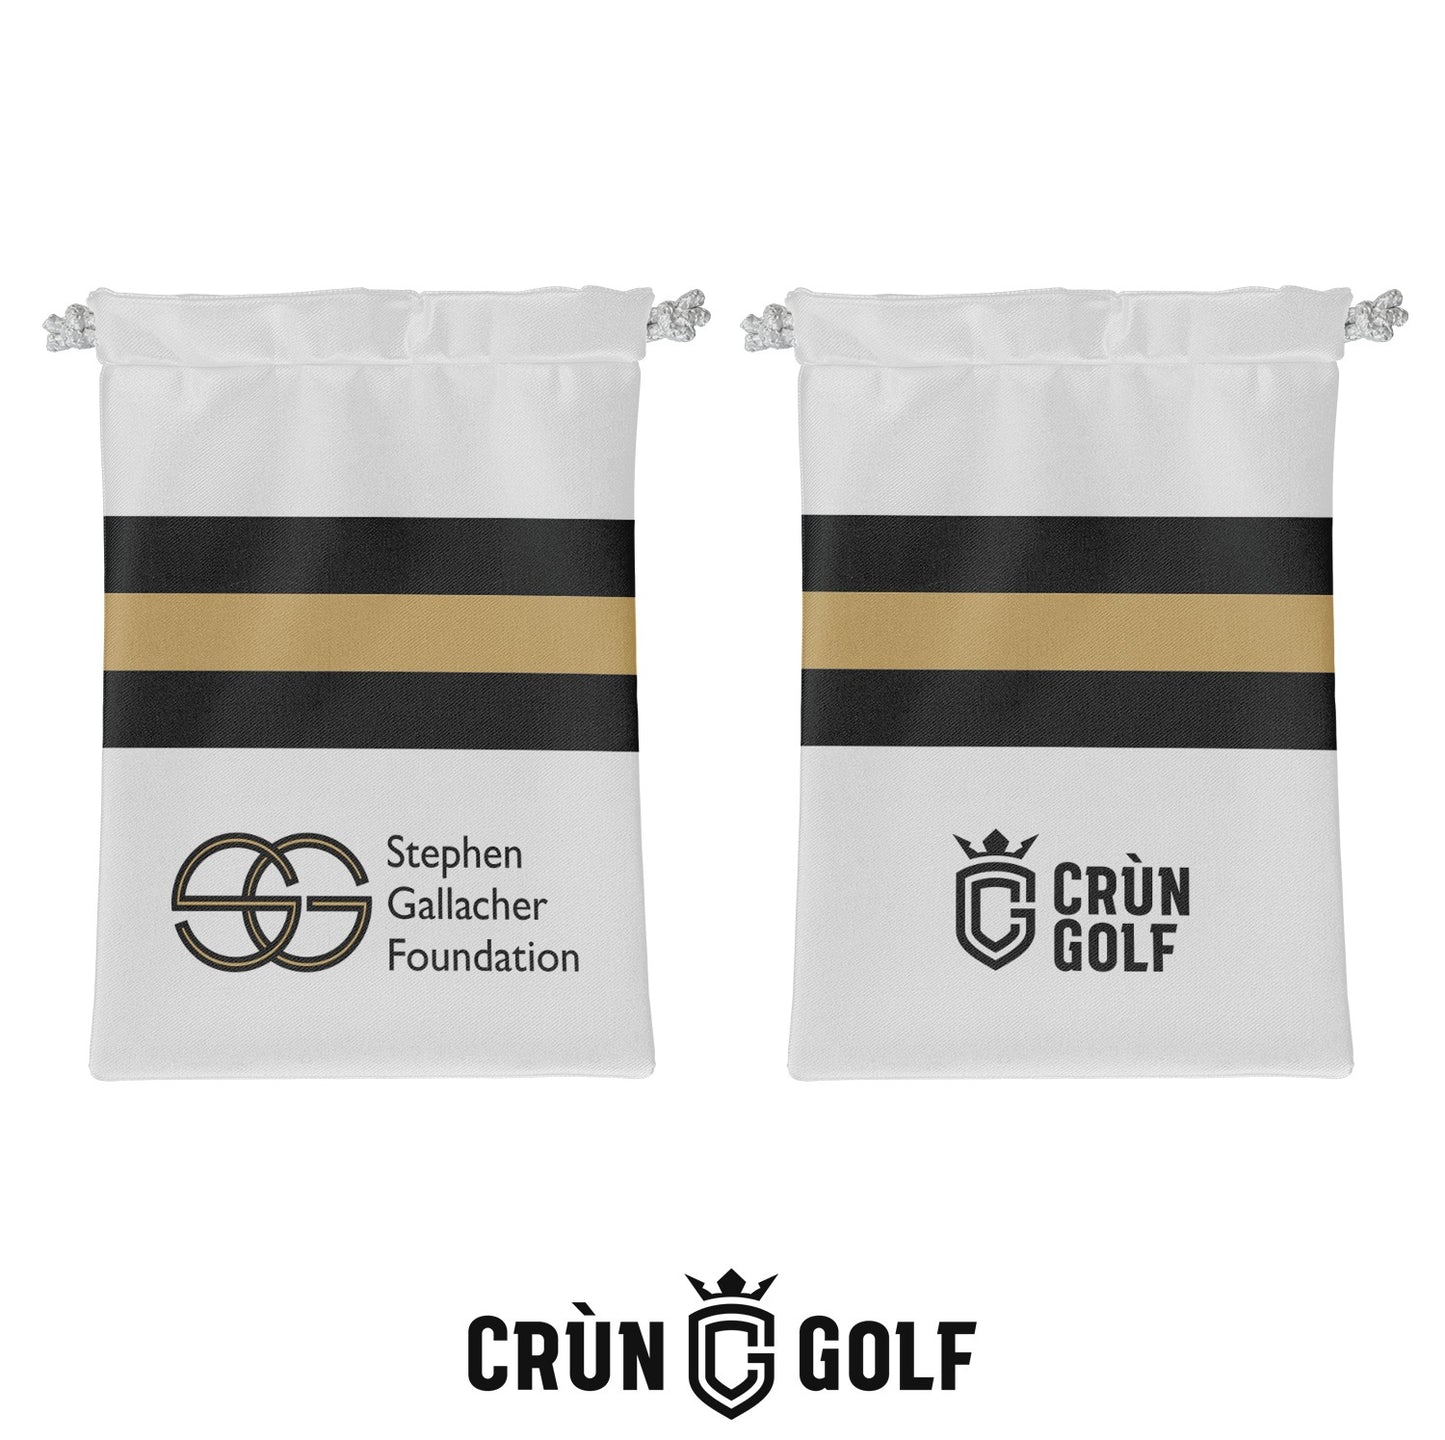 Stephen Gallacher Foundation Striped Valuables Pouch - White / Black / Gold